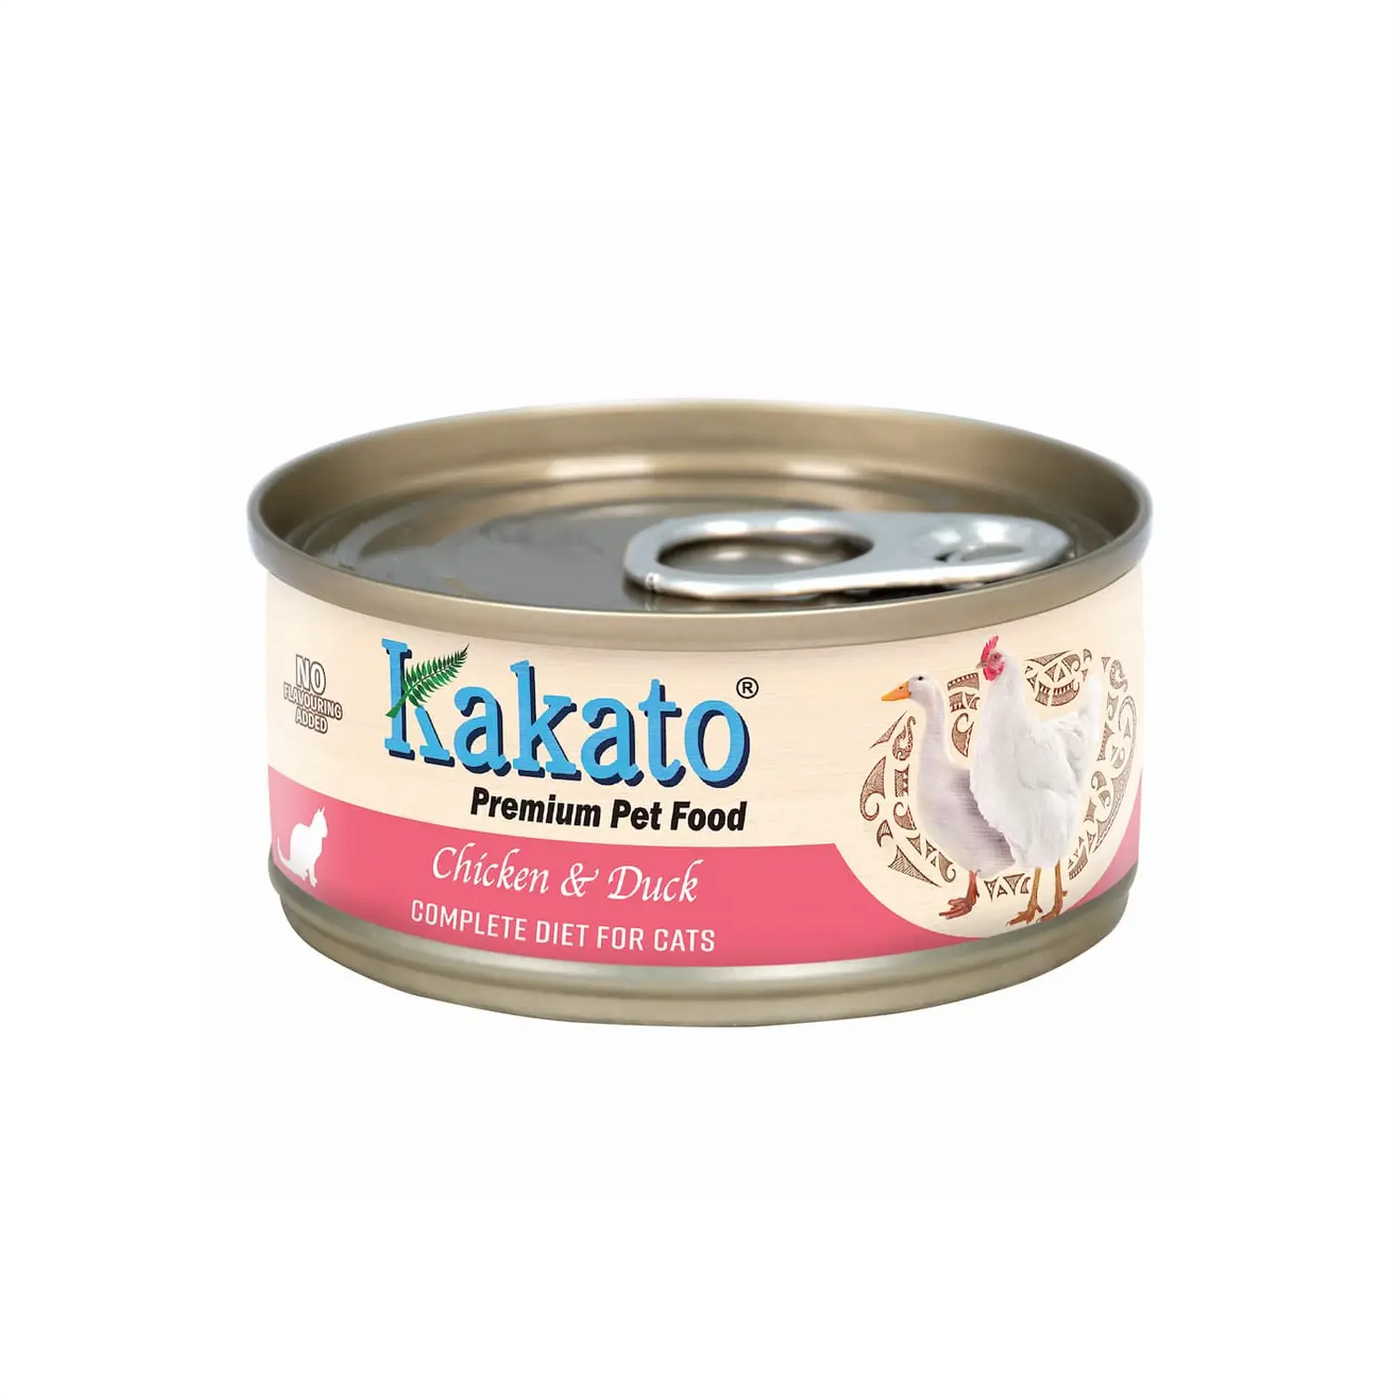 Kakato - Complete Diet Tinned Food for Cats - Chicken & Duck 70g [For VetPoints Redemption]